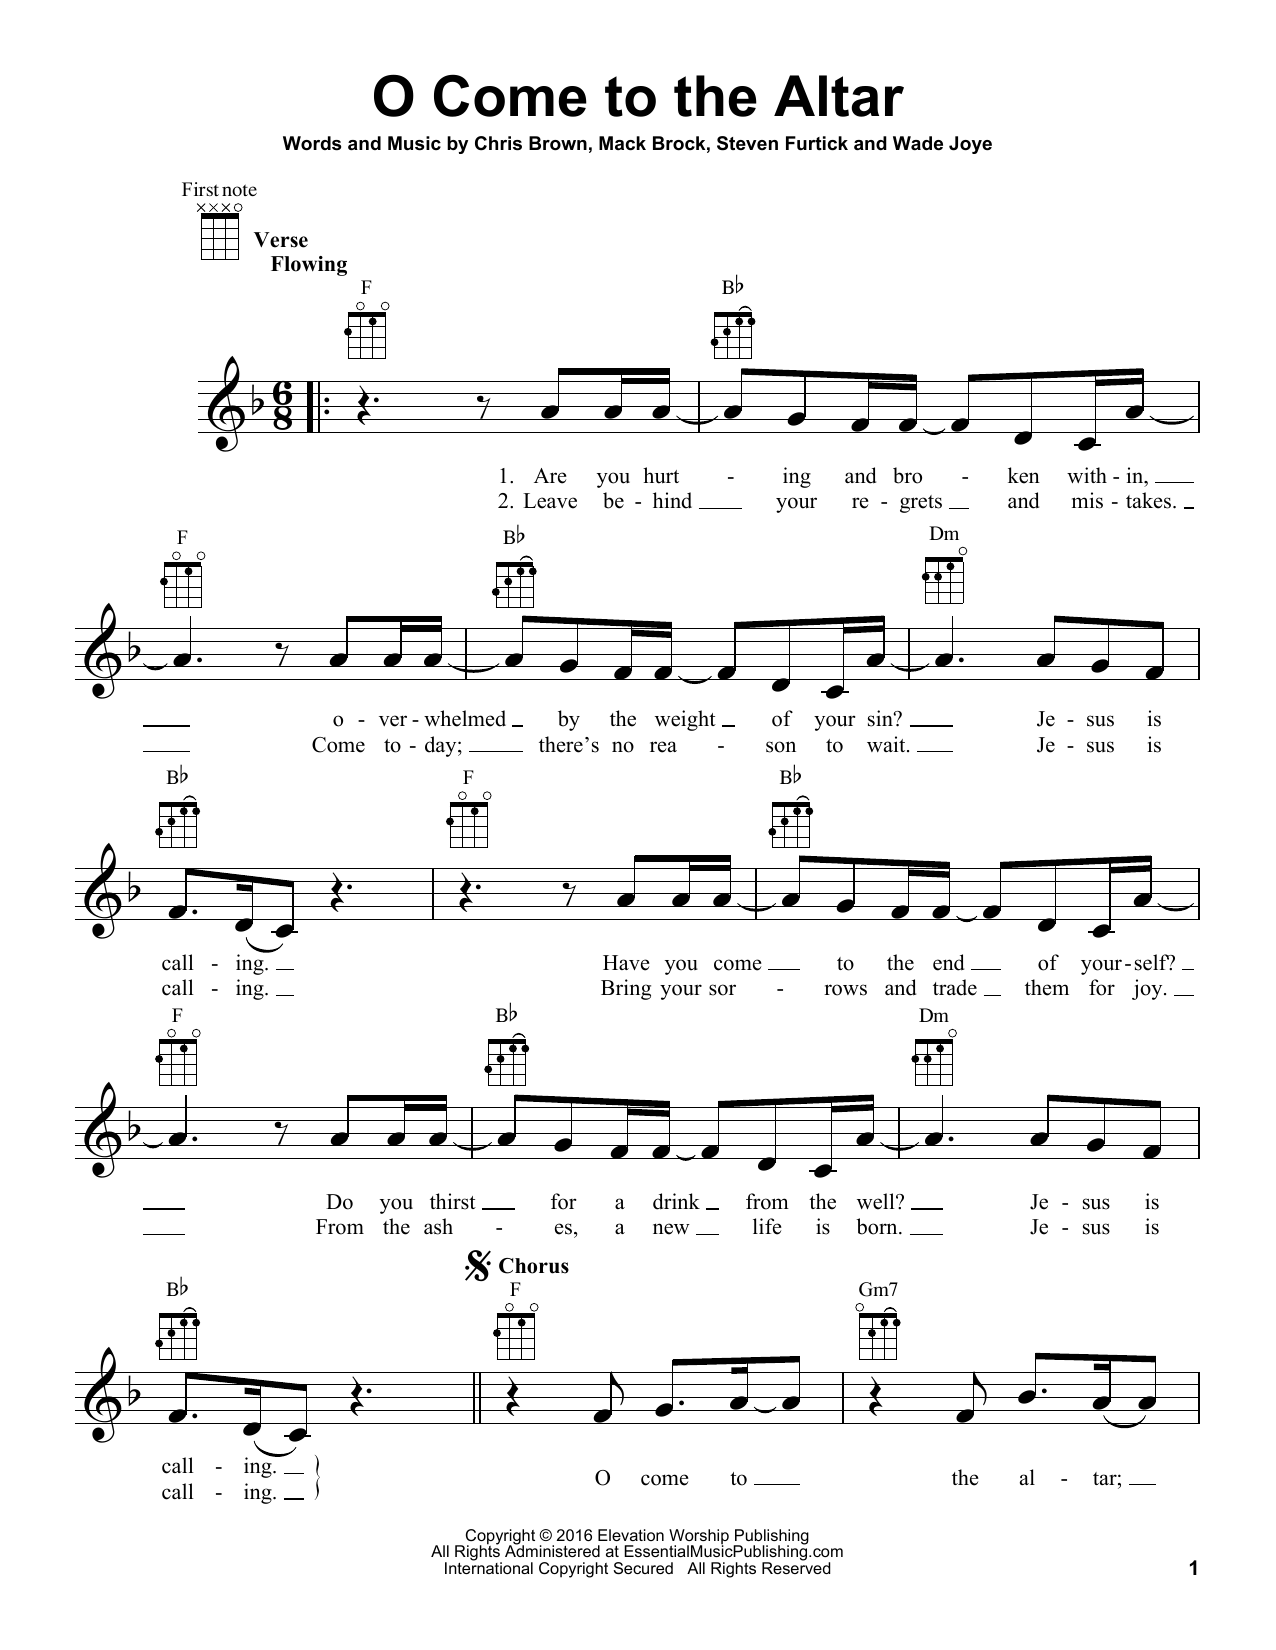 Download Elevation Worship O Come To The Altar Sheet Music